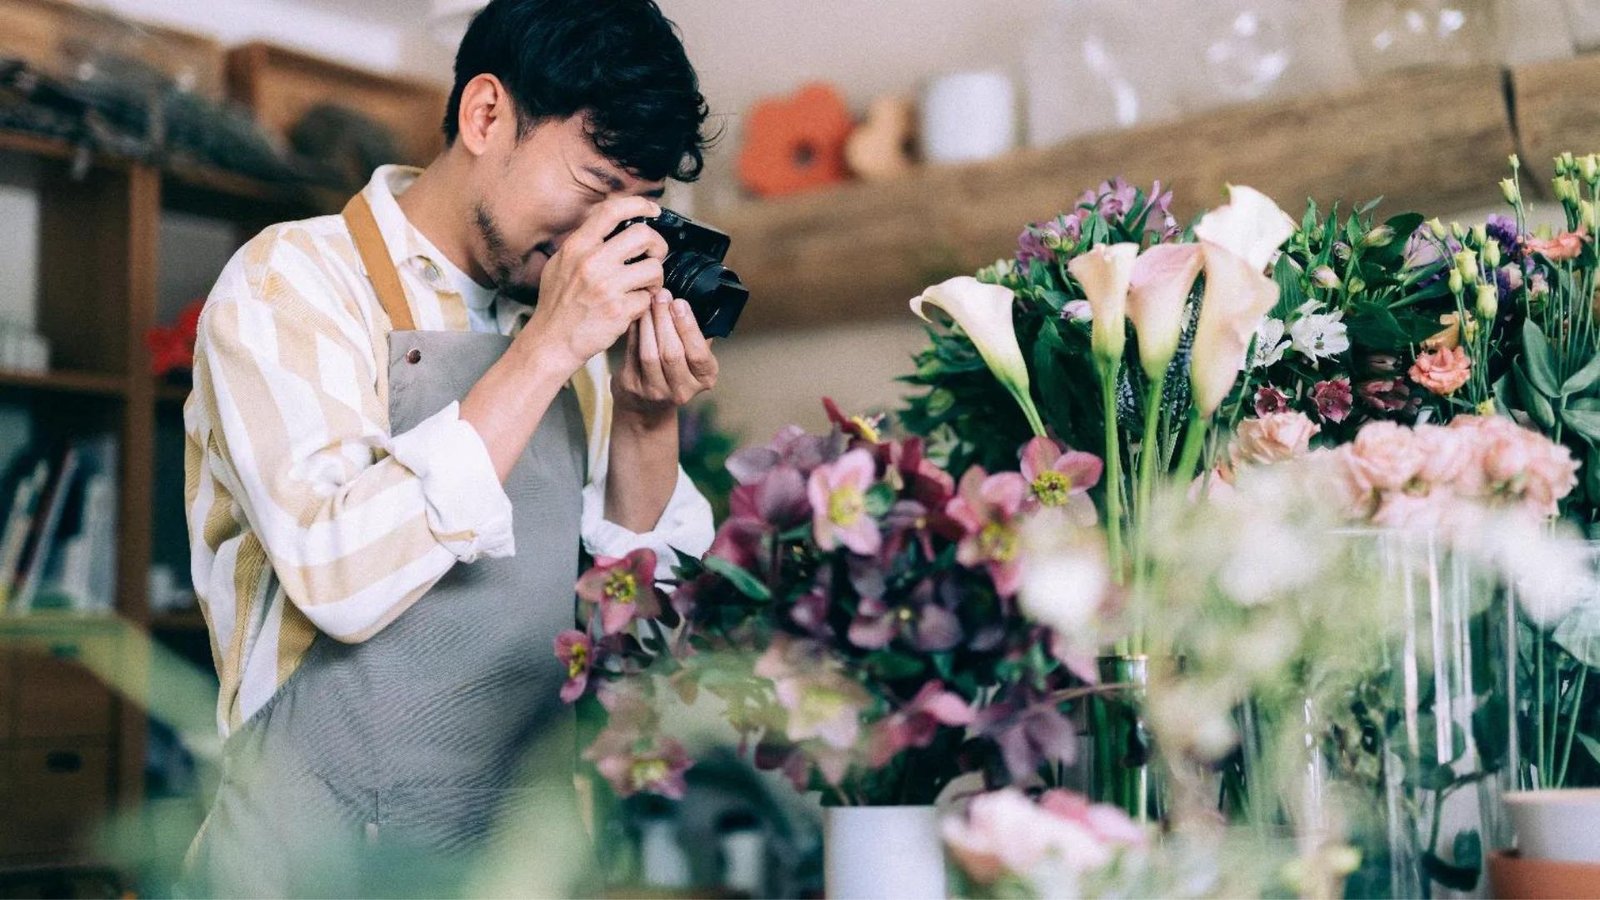 A man taking a photo of flowers showing Digital Marketing for Small Businesses in Fonni.